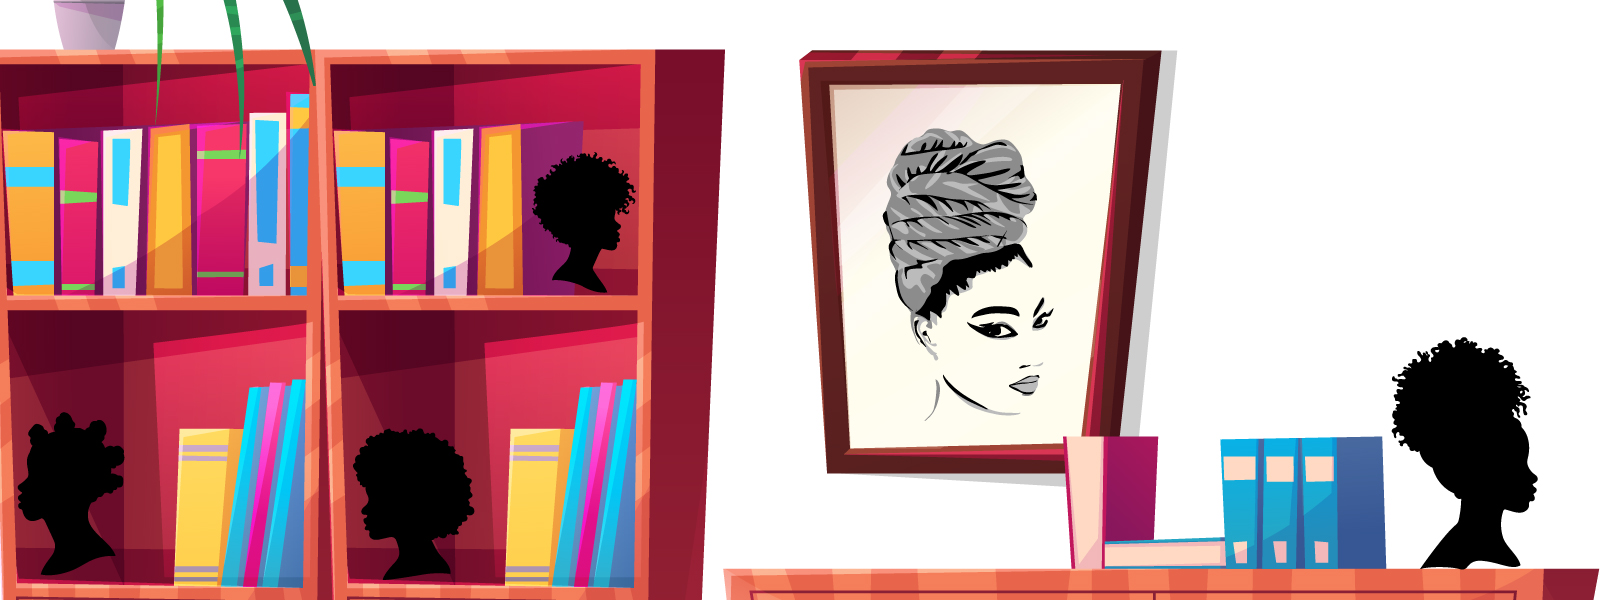 An illustration of bookshelves with Black girl statue busts on the shelves with a picture of a Black woman with a head wrap in a frame on the wall.